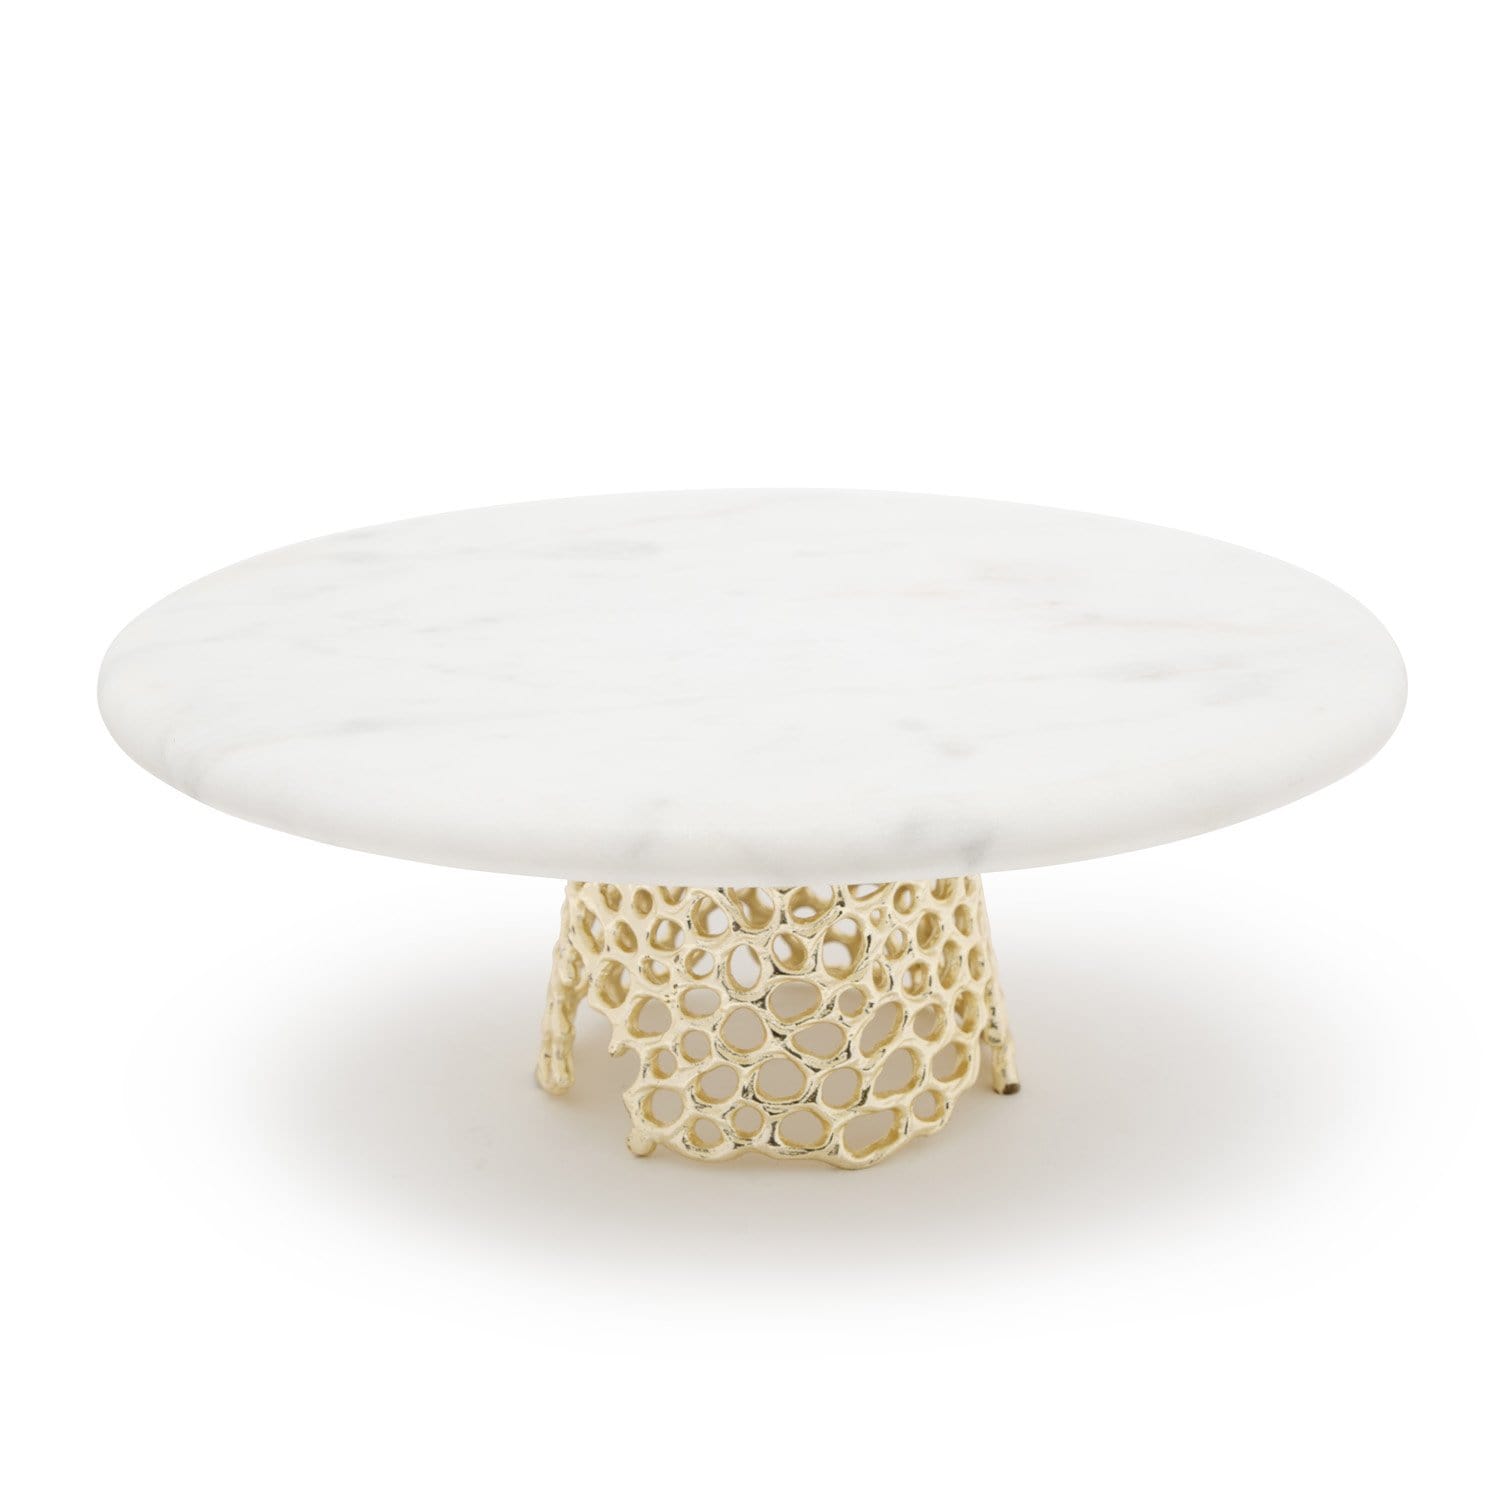 ALEXANDER BRASS MESH CAKE STAND WHT MRBL WITH GOLD FINSHED BRASS - 117142